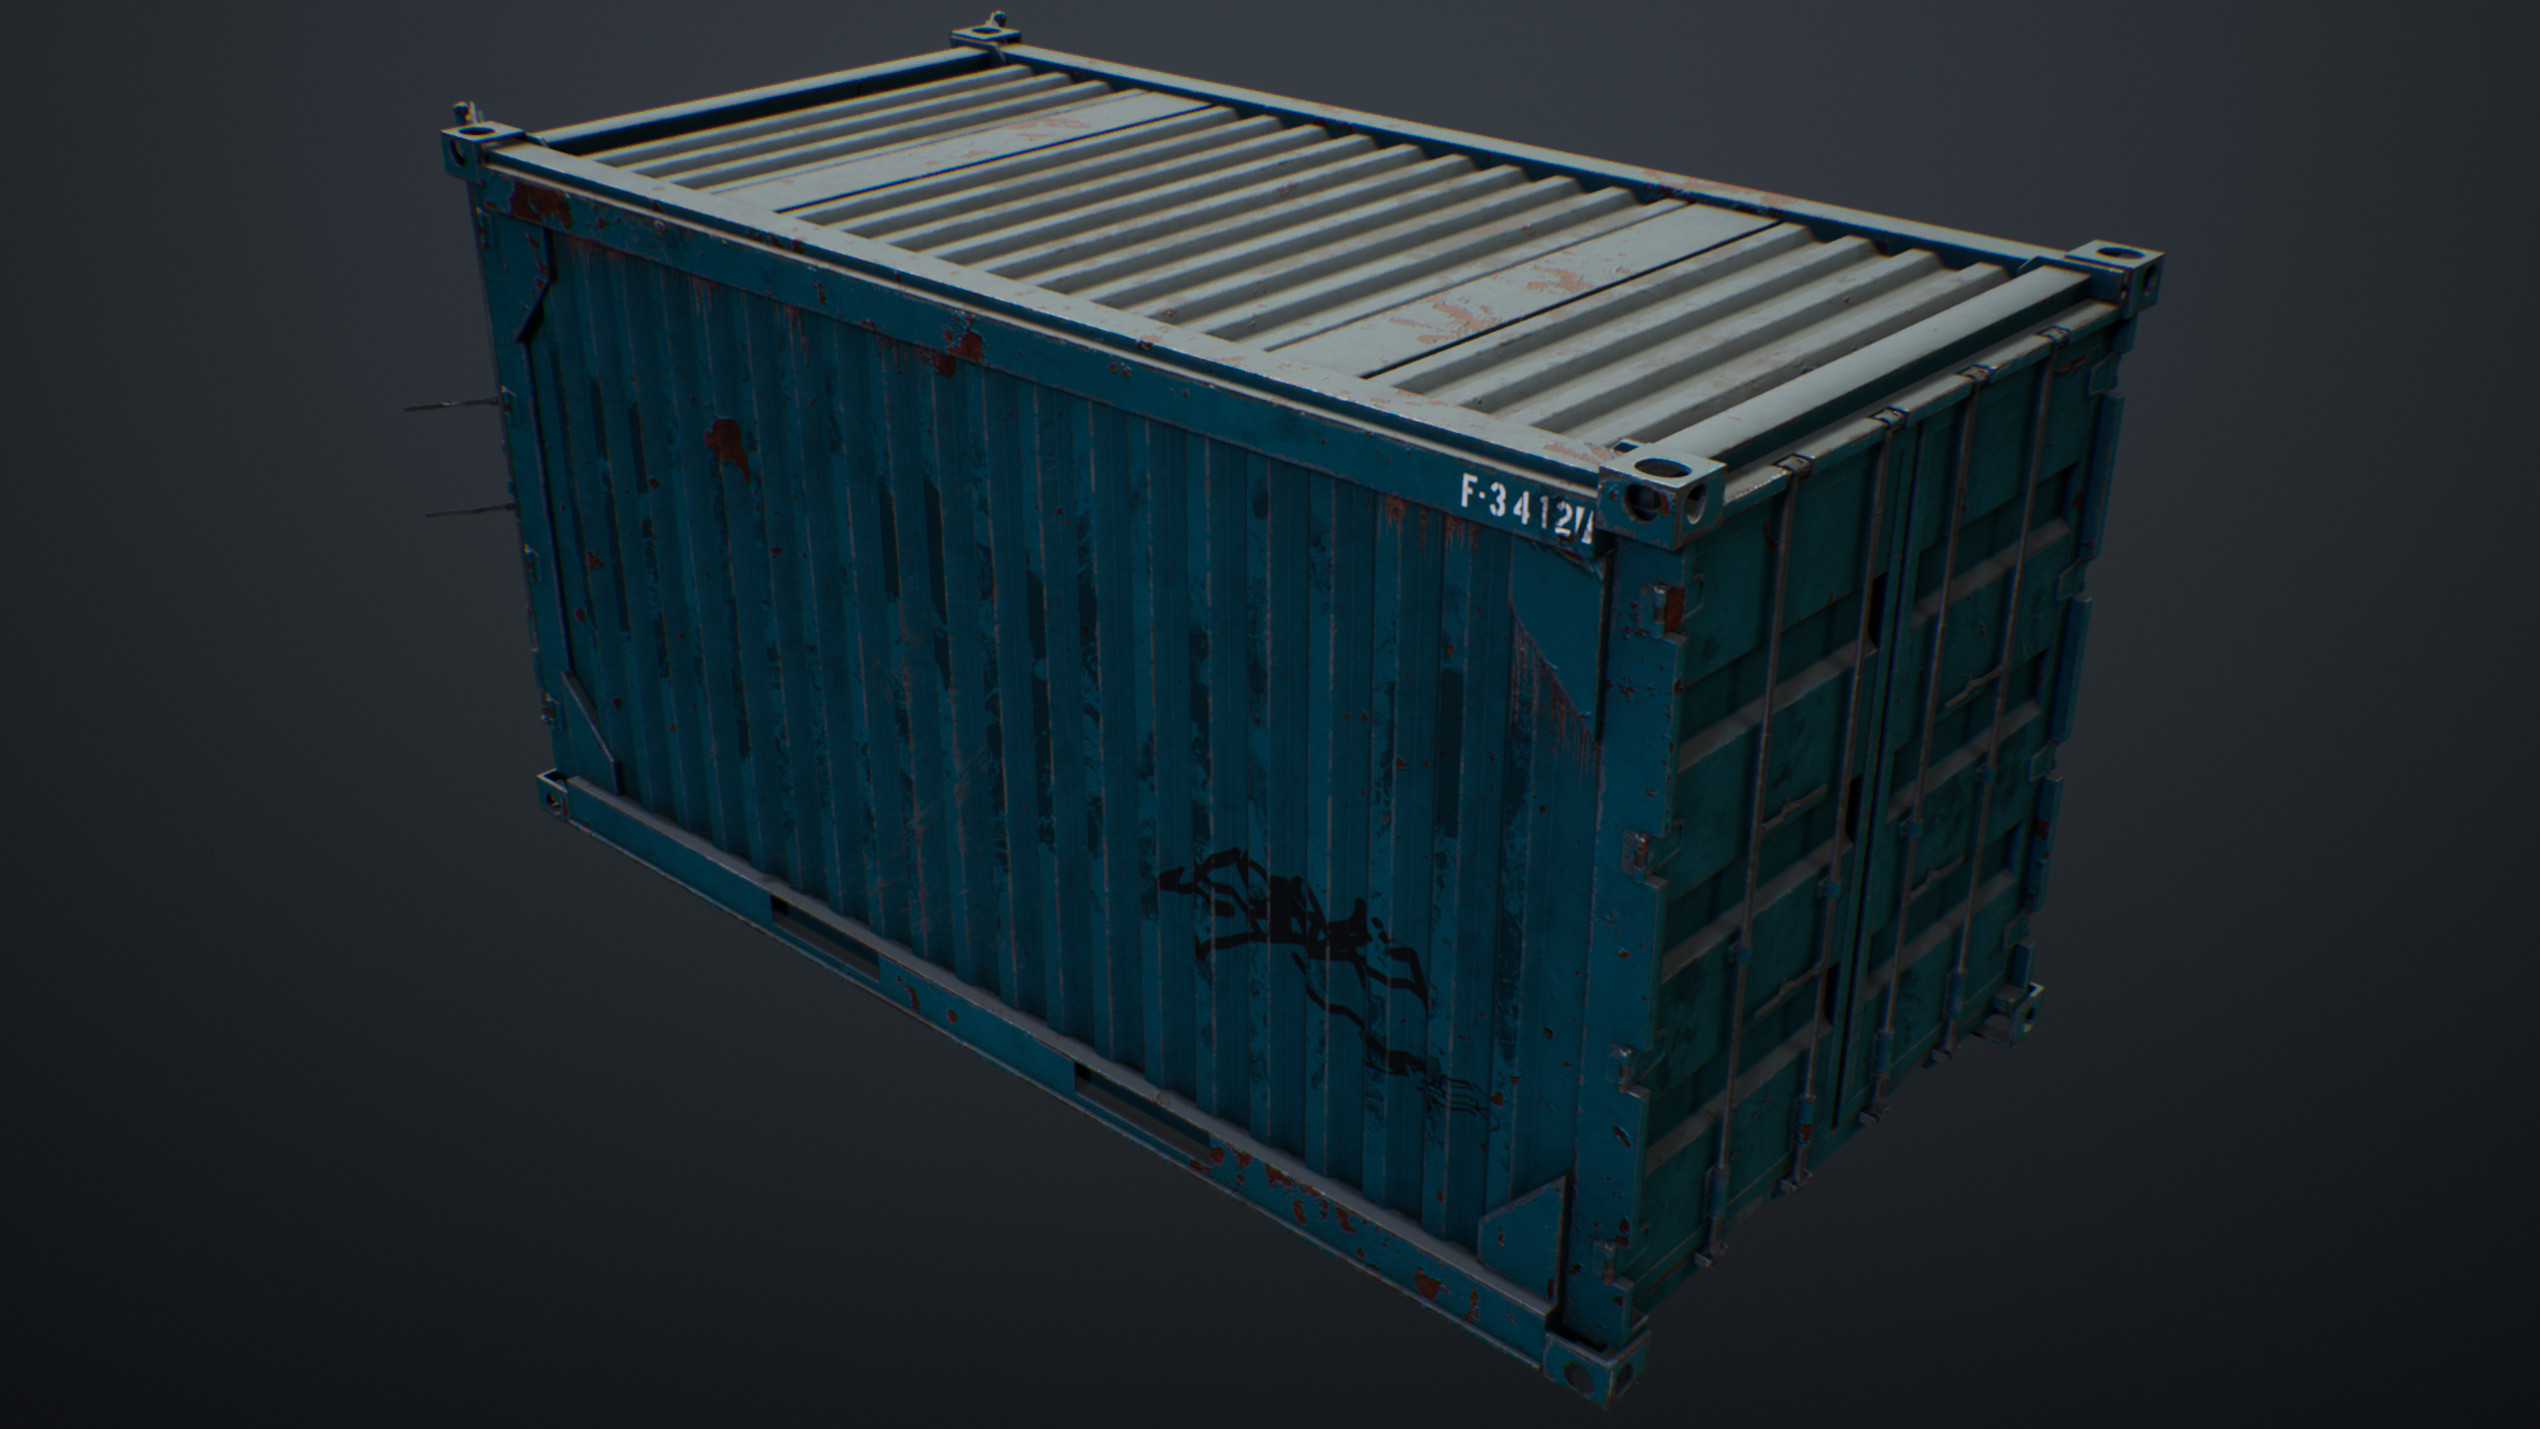 UE4 screenshot of the container back right view.